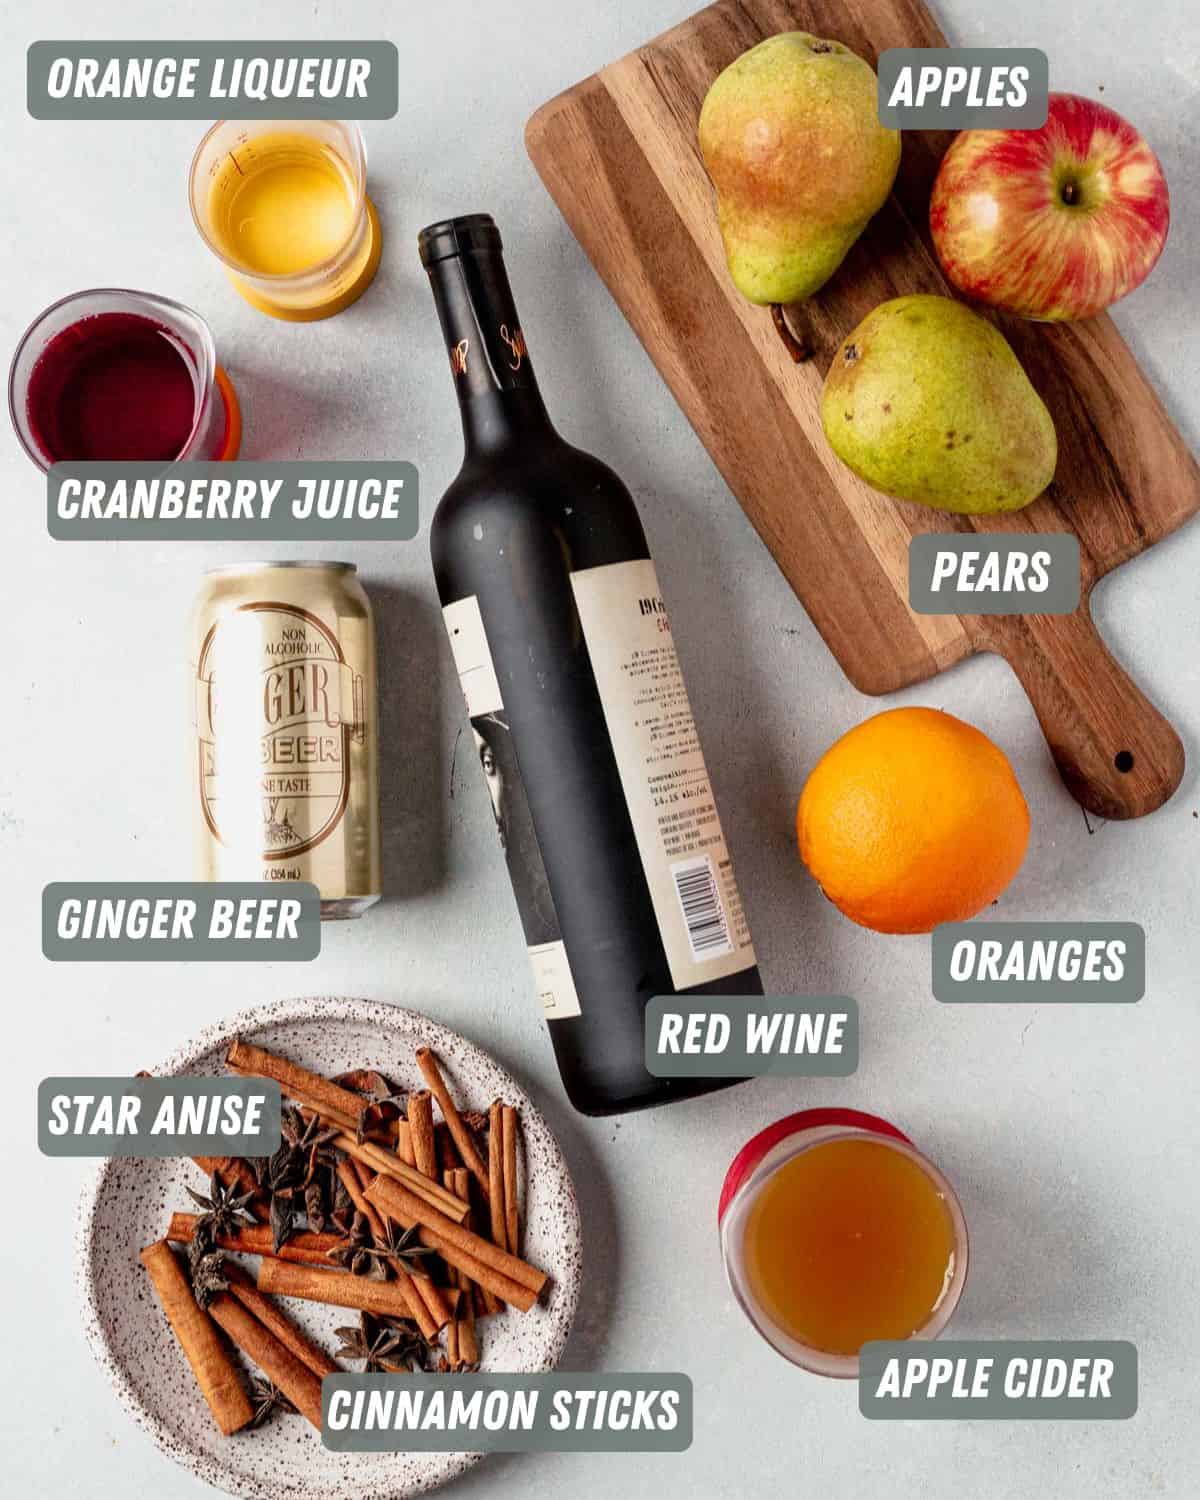 a bottle of red wine, orange, apples, apple cider, cranberry juice and cinnamon sticks on a table